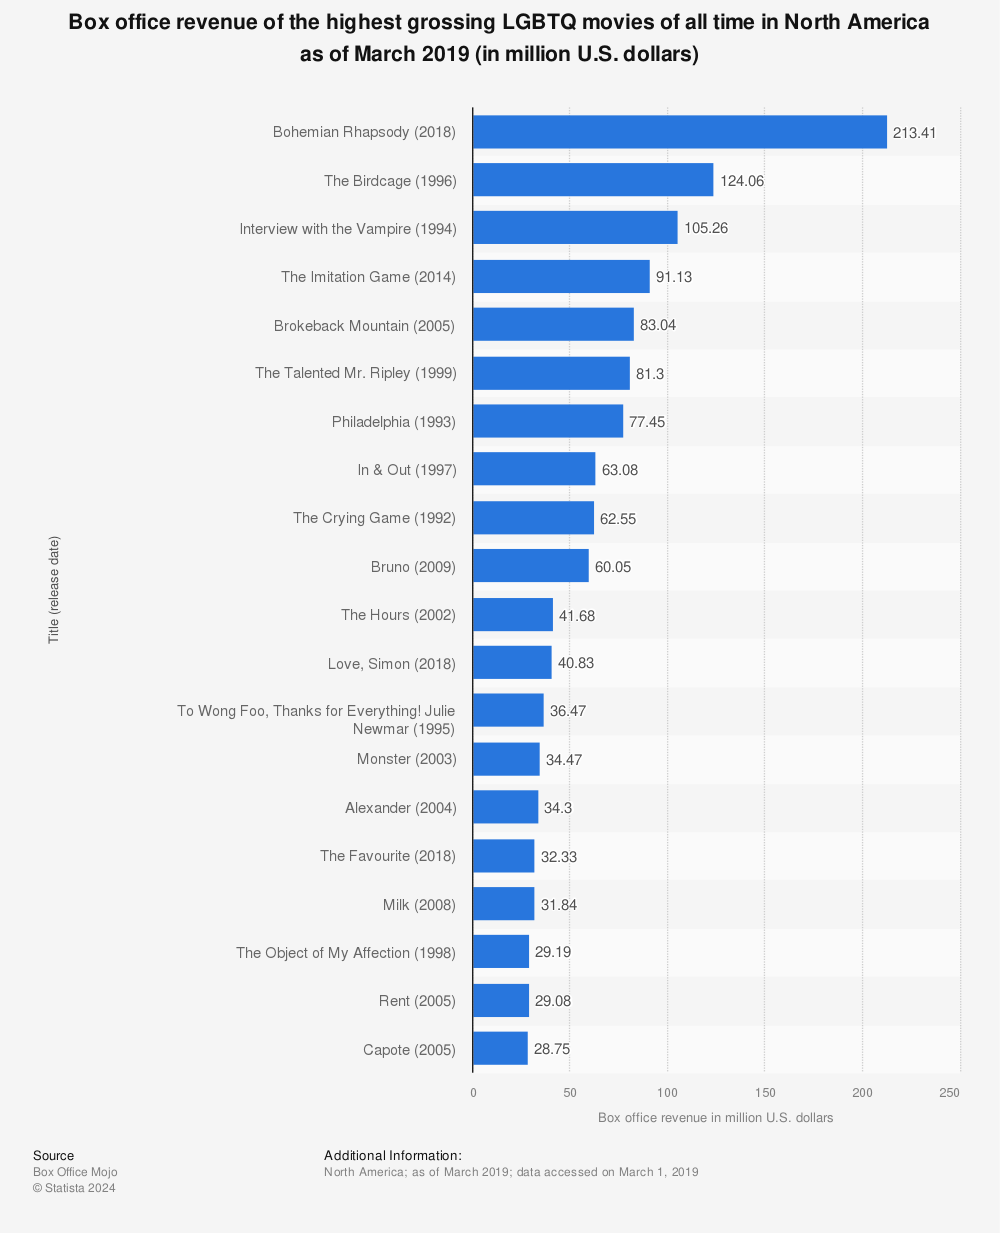 Statistic: Box office revenue of the highest grossing LGBTQ movies of all time in North America as of March 2019 (in million U.S. dollars) | Statista